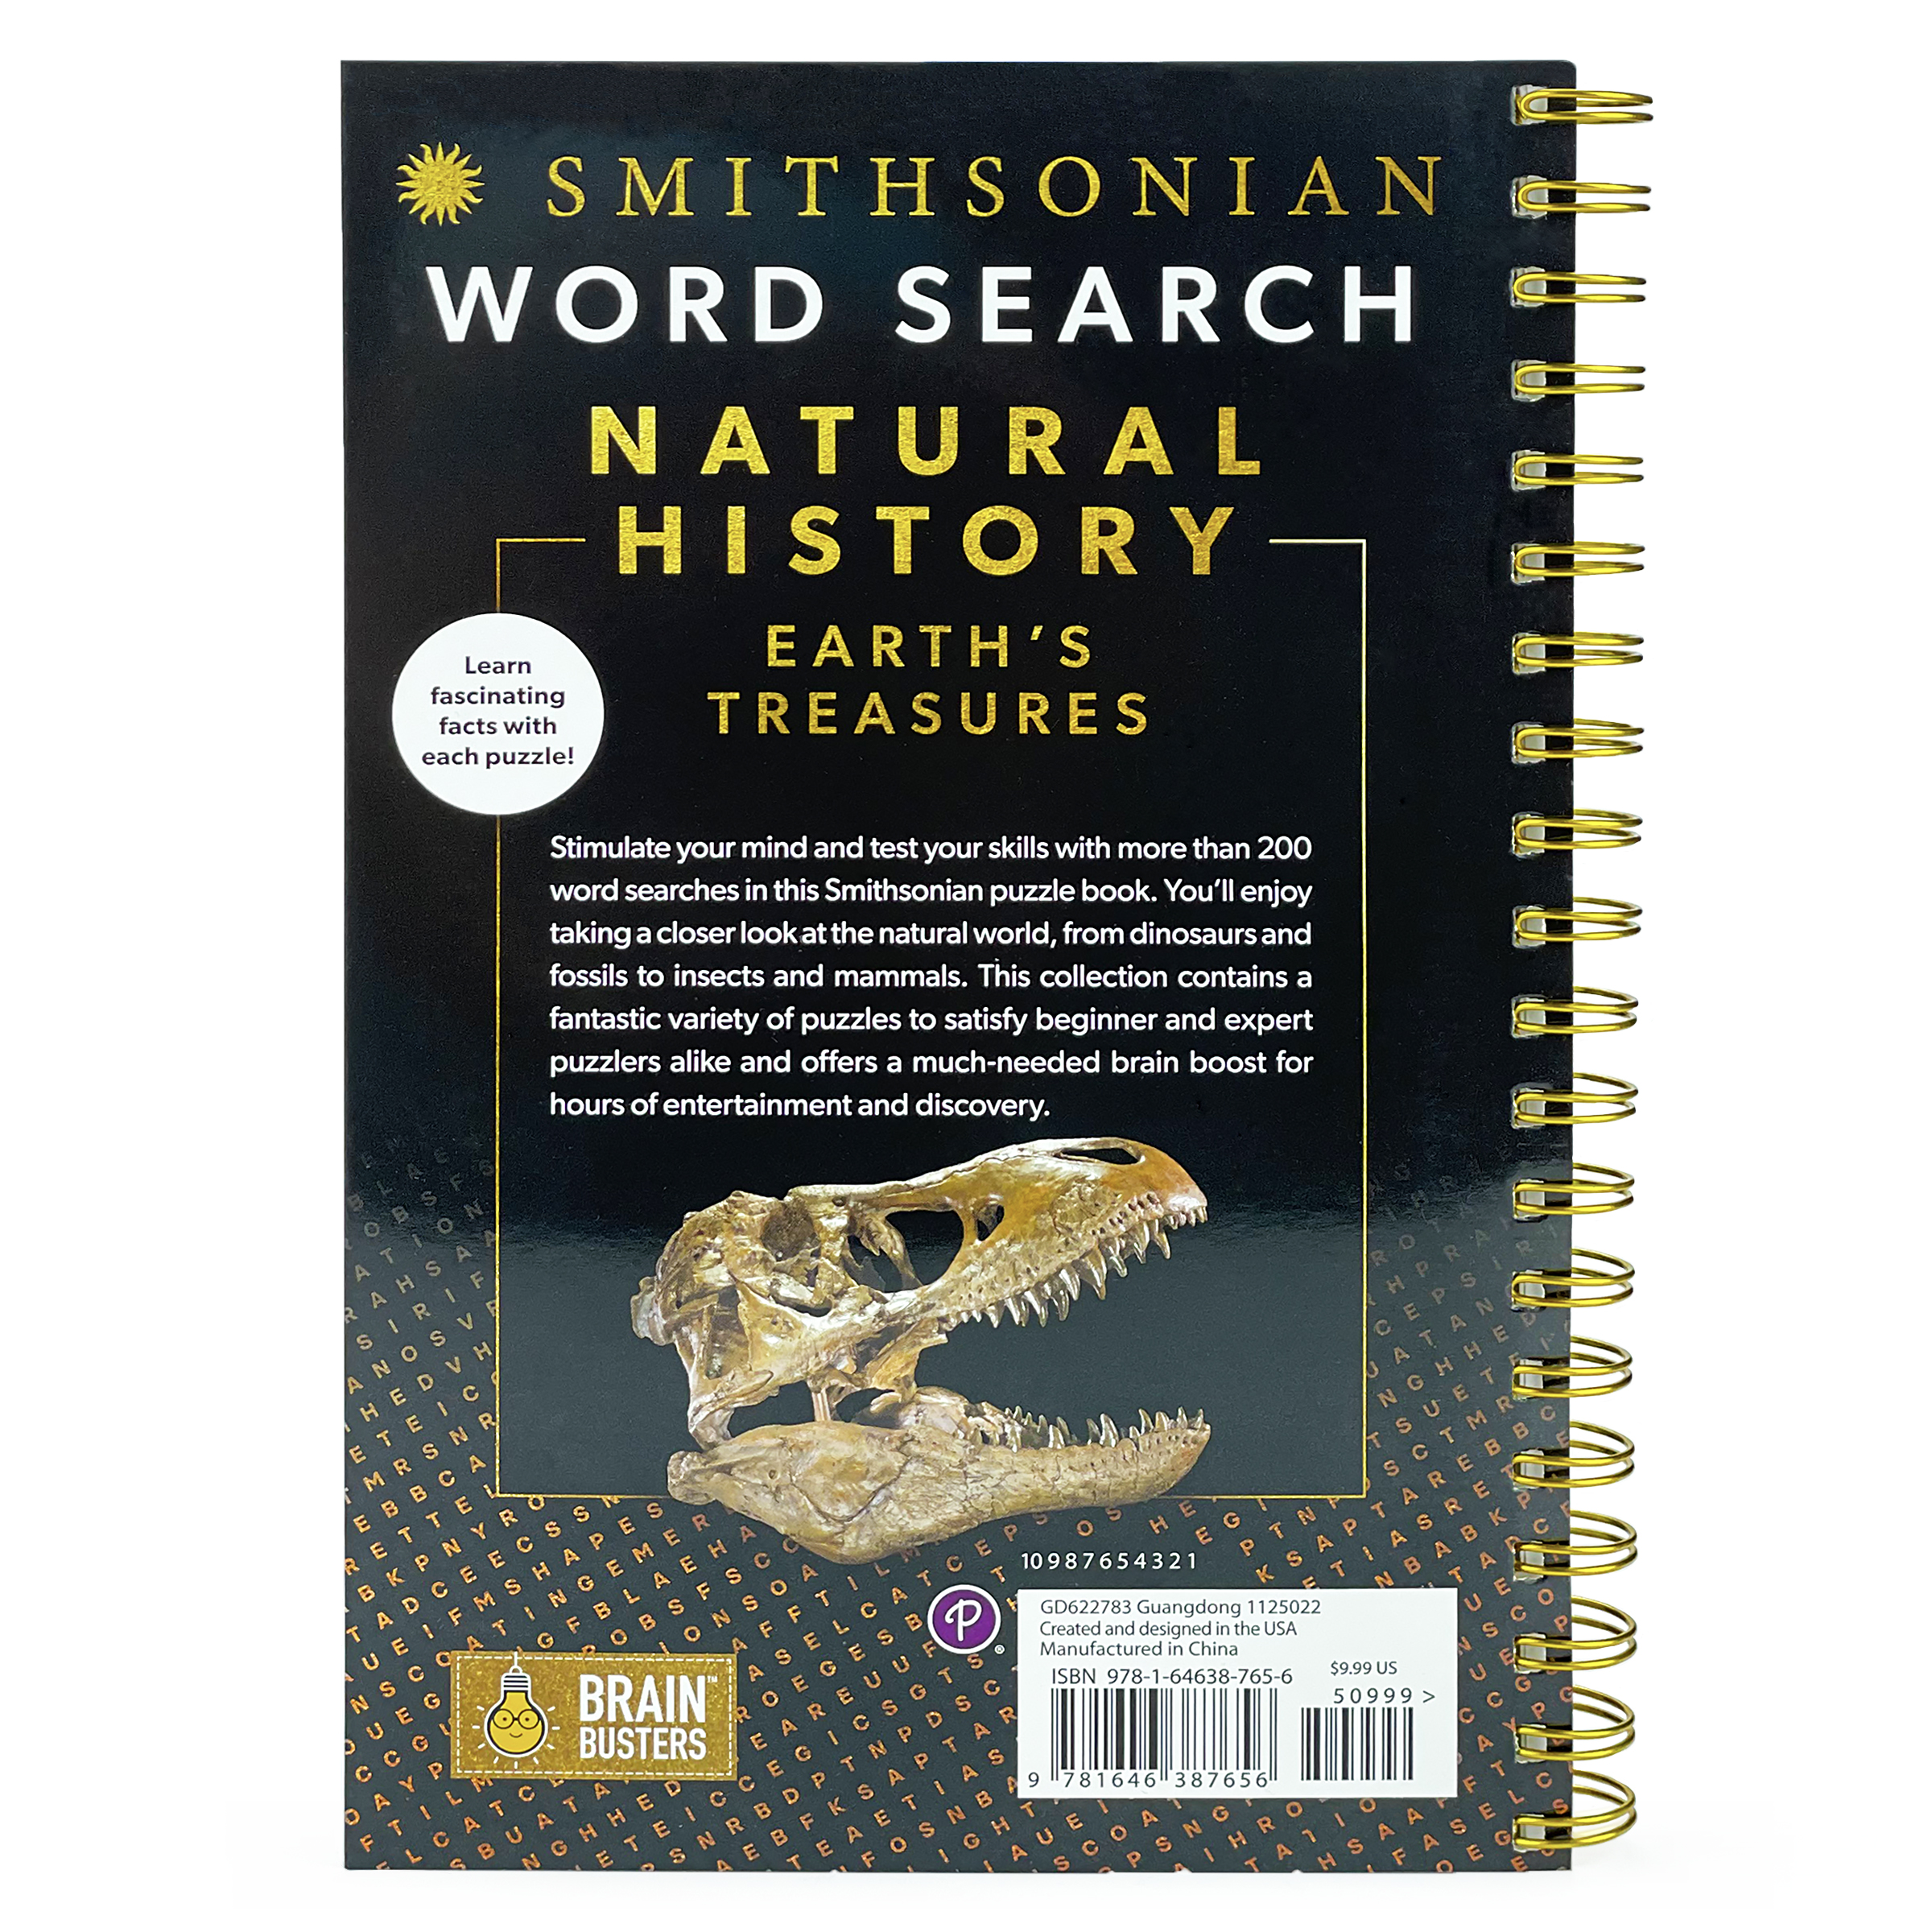 Smithsonian Word Search Natural History: Earth's Treasures